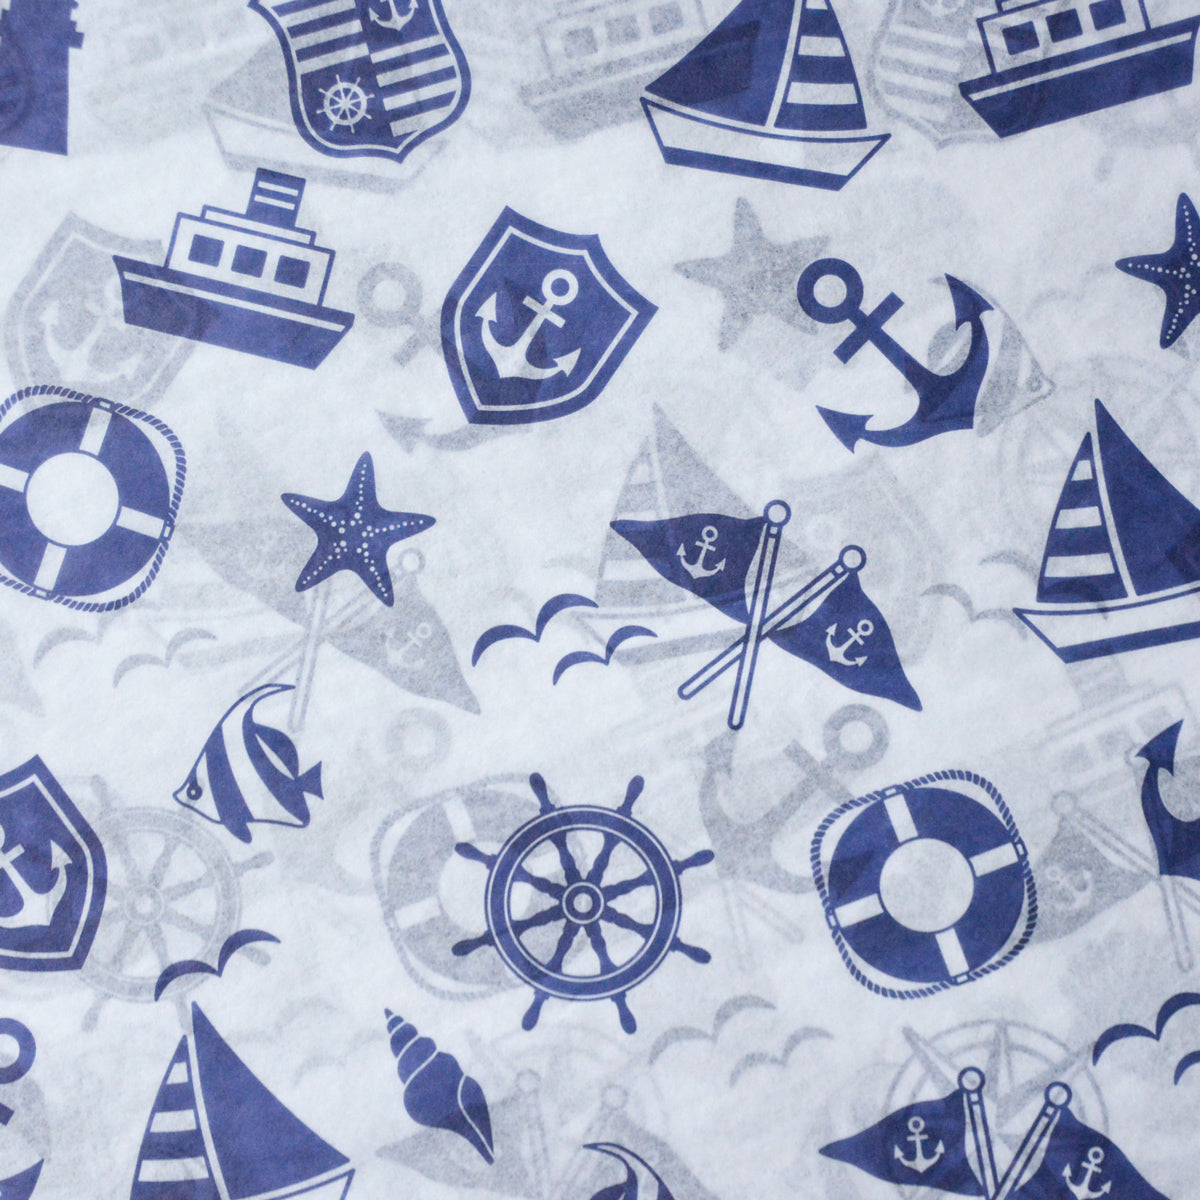 Nautical Pattern Tissue Paper - Navy Ocean Pattern Gift Wrapping Paper, Beach Pattern Paper, Paper Craft Supplies, Party Loot Bags Paper